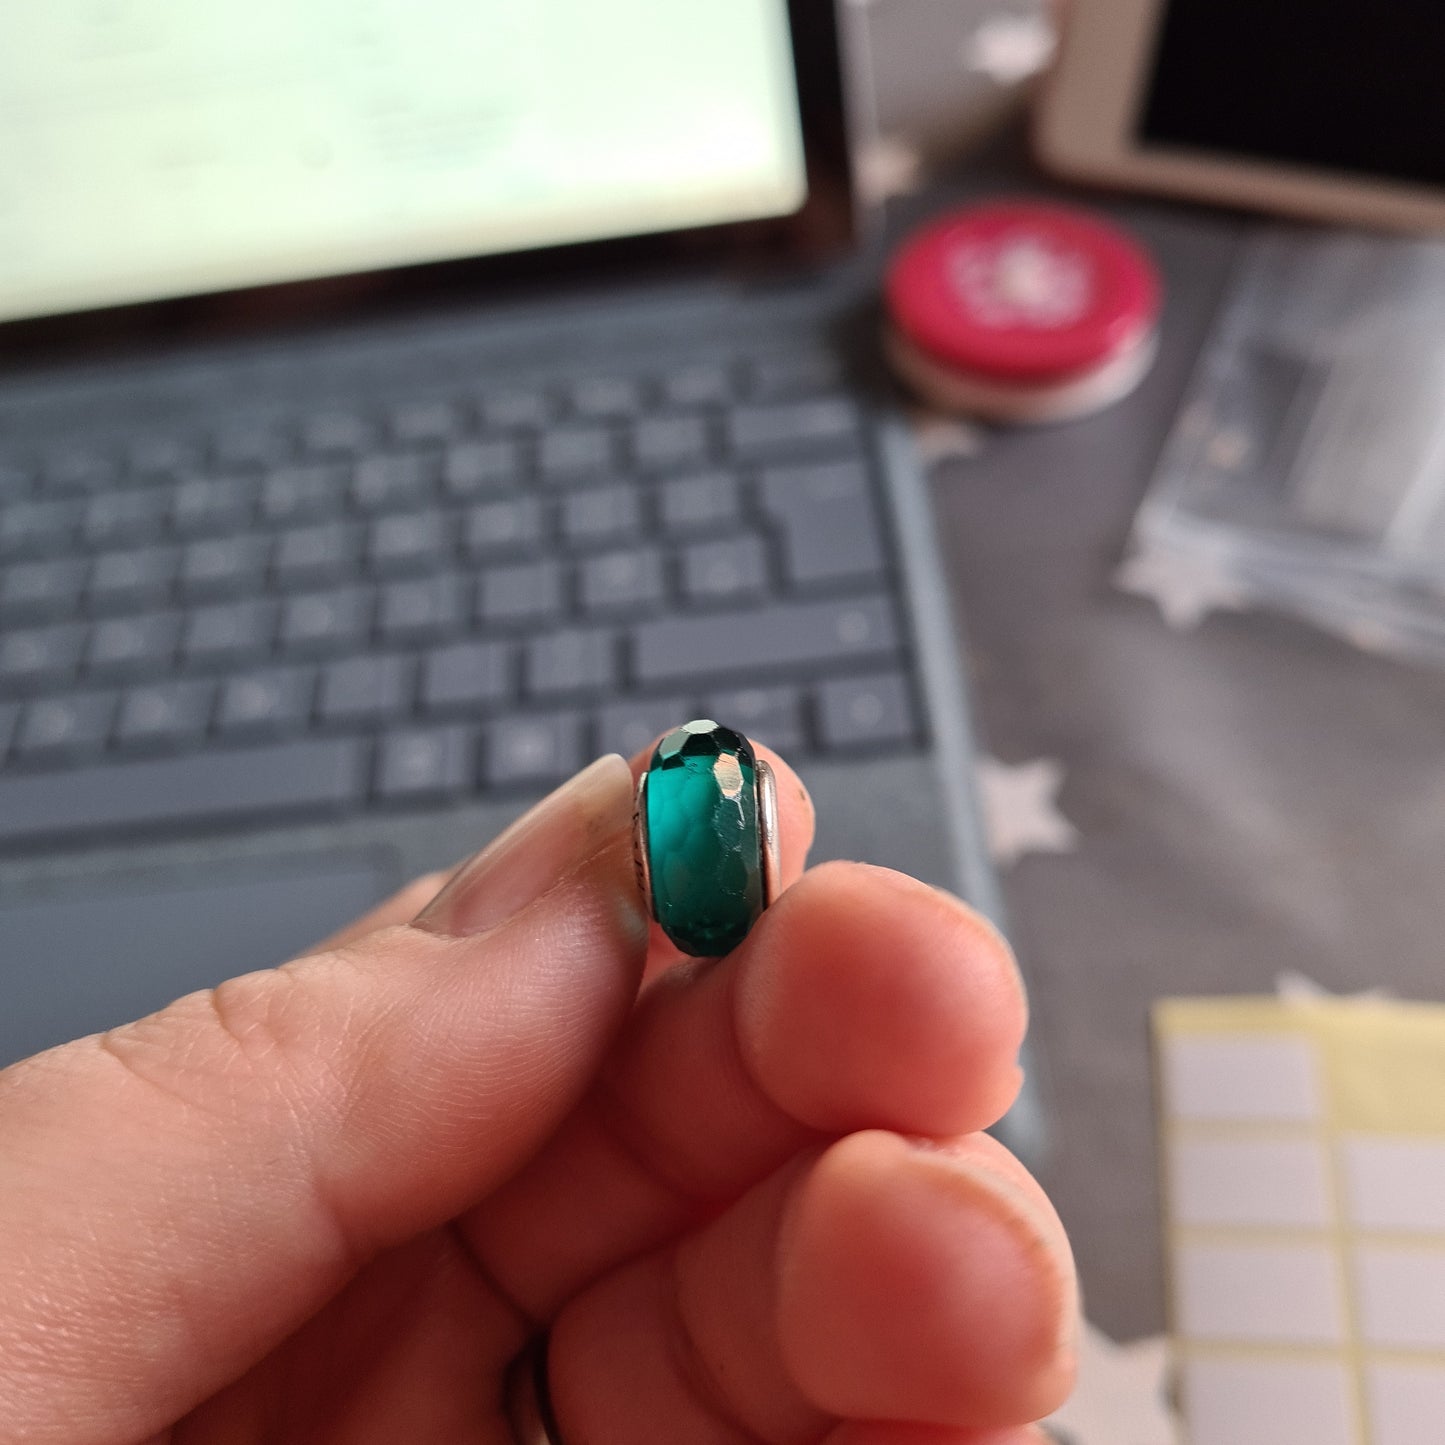 Genuine Pandora Faceted Murano Blue Green Teal Turquoise Glass Charm